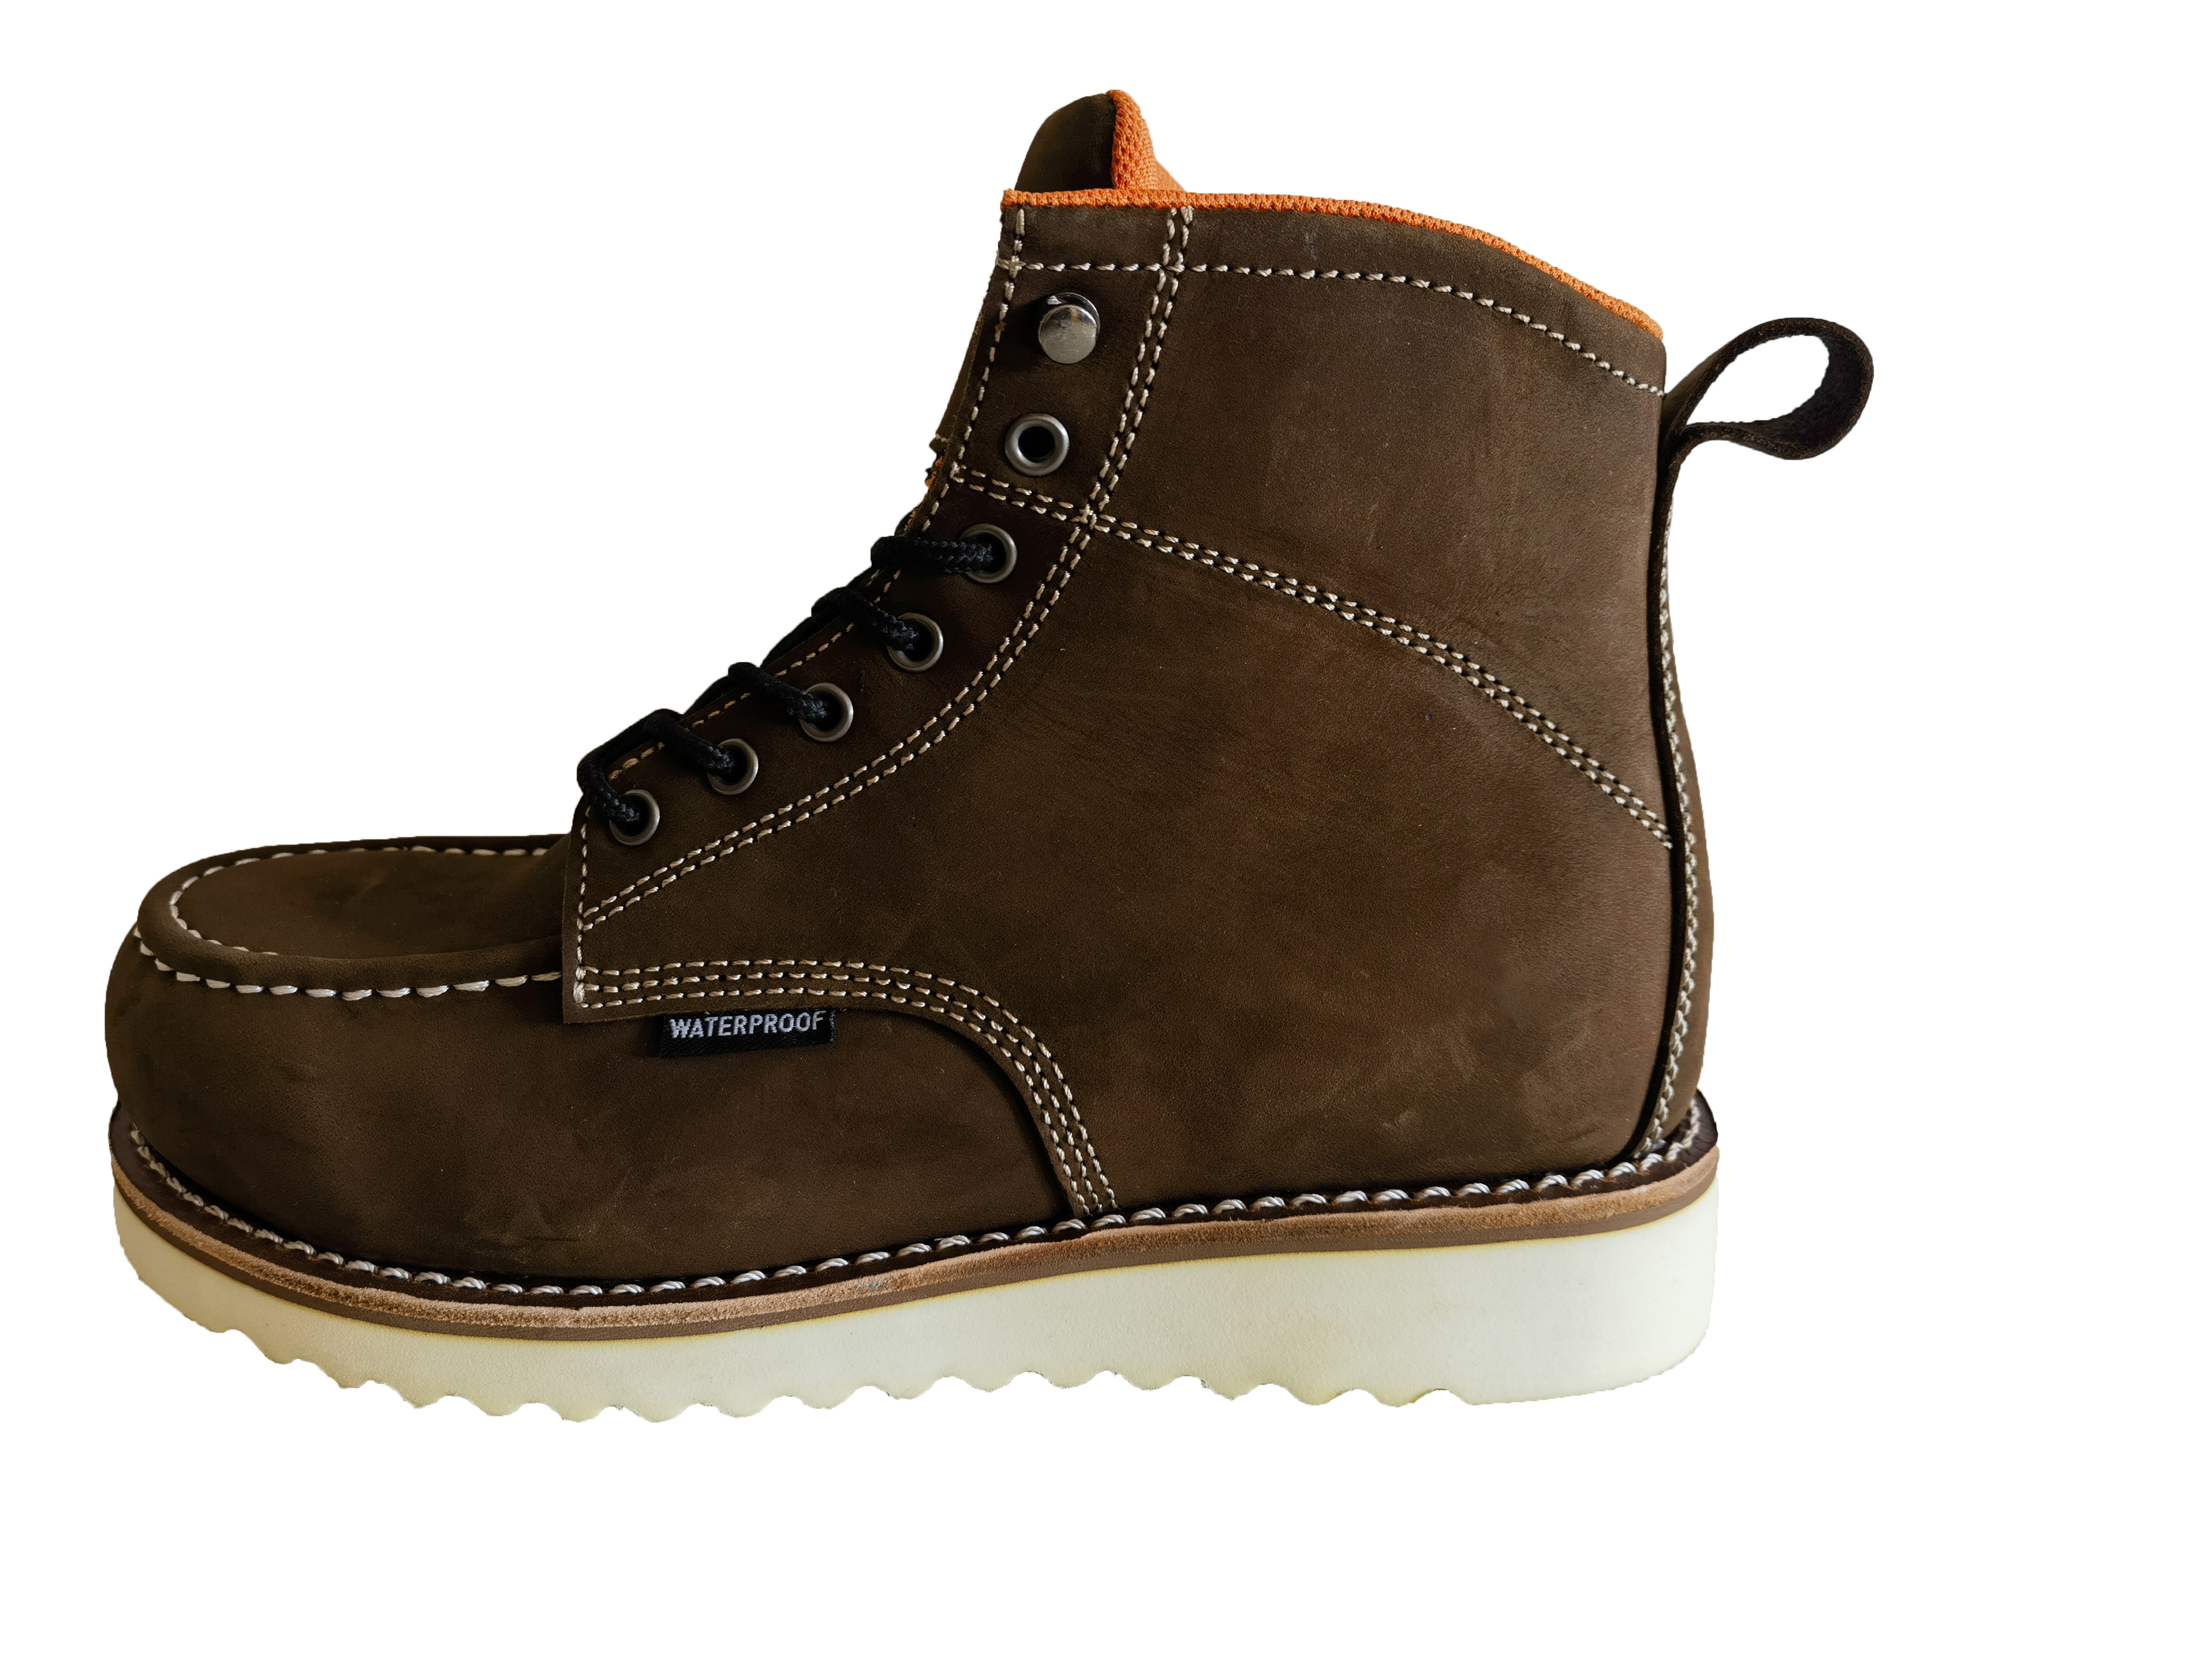 Prominent Security Guard Boot Review: Find the Perfect Pair to Secure Your Surroundings